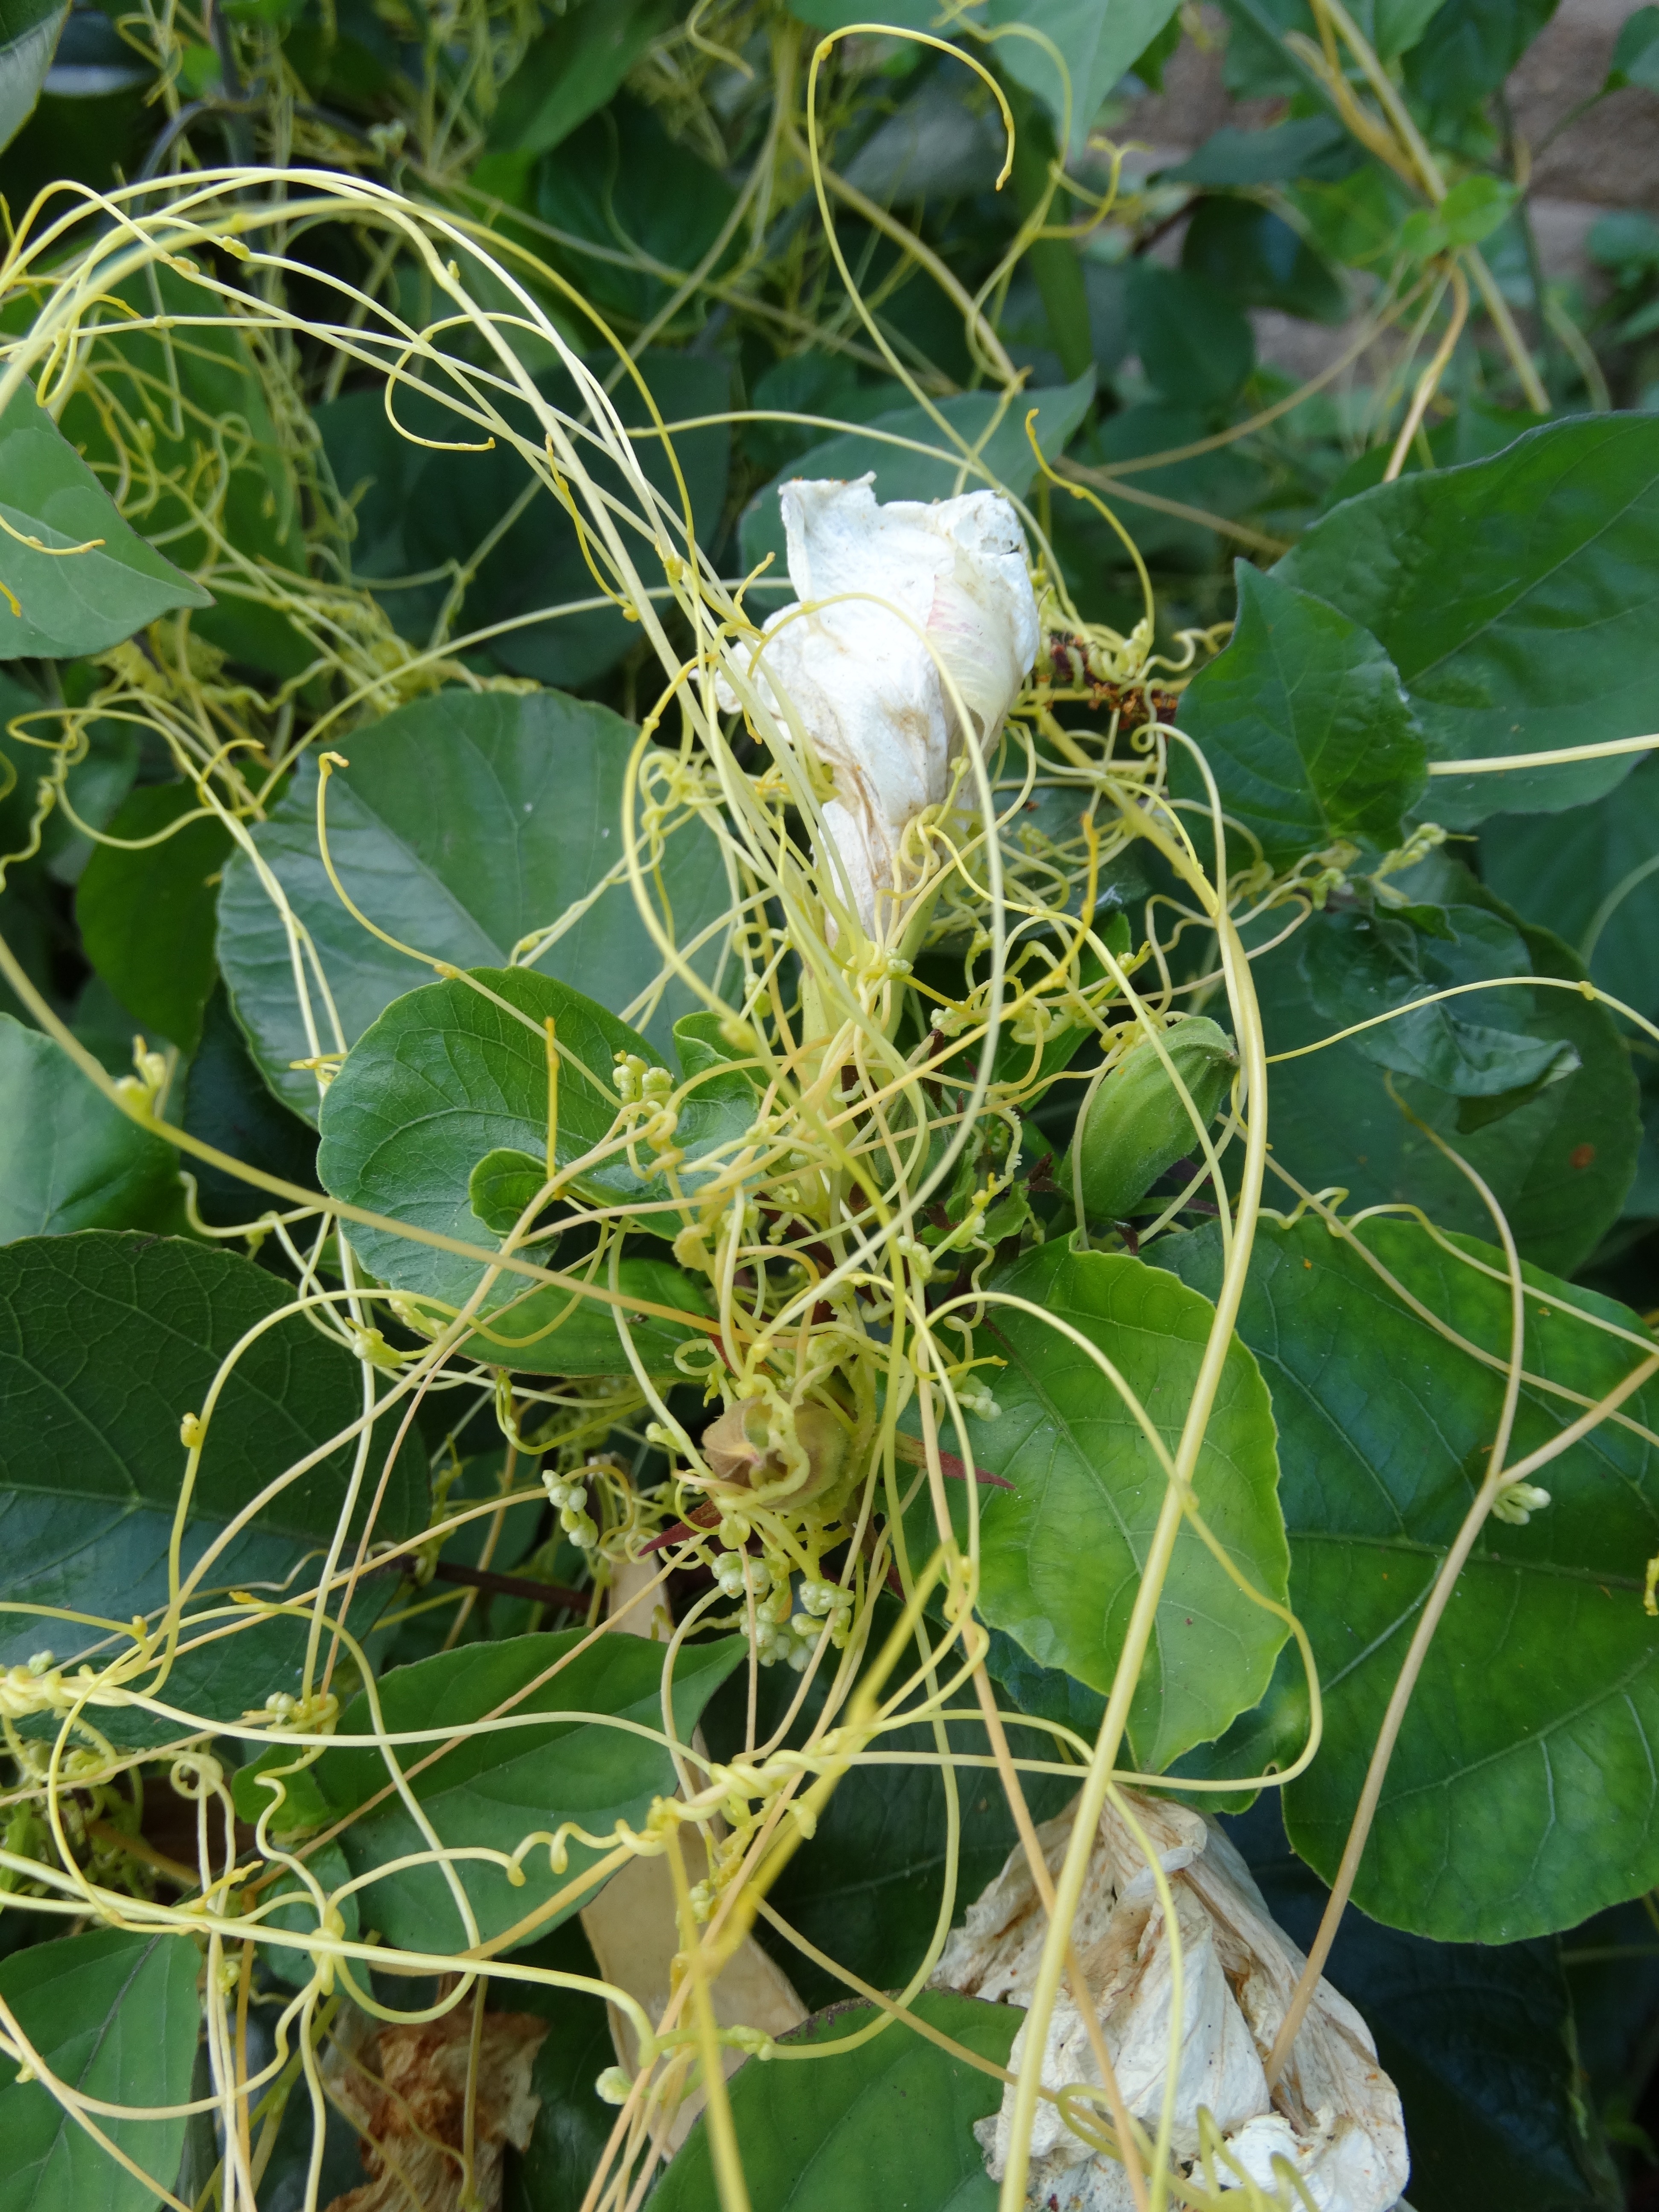 Dodder on its host plant, white hibiscus. Dodder has light yellow-green, spindly stems and wraps around the host. 